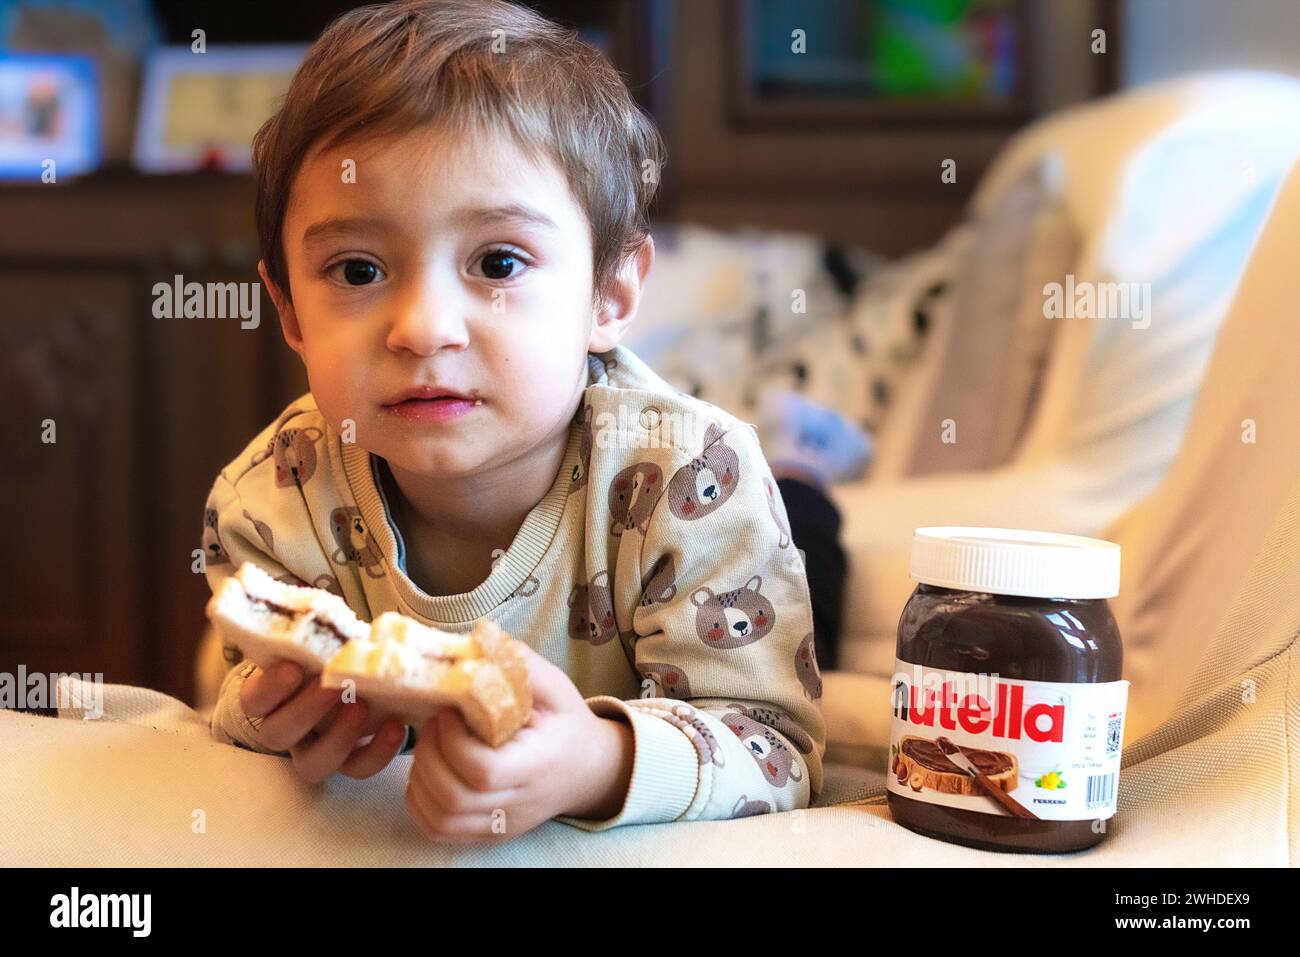 A relaxing afternoon snacking on Nutella. Stock Photo